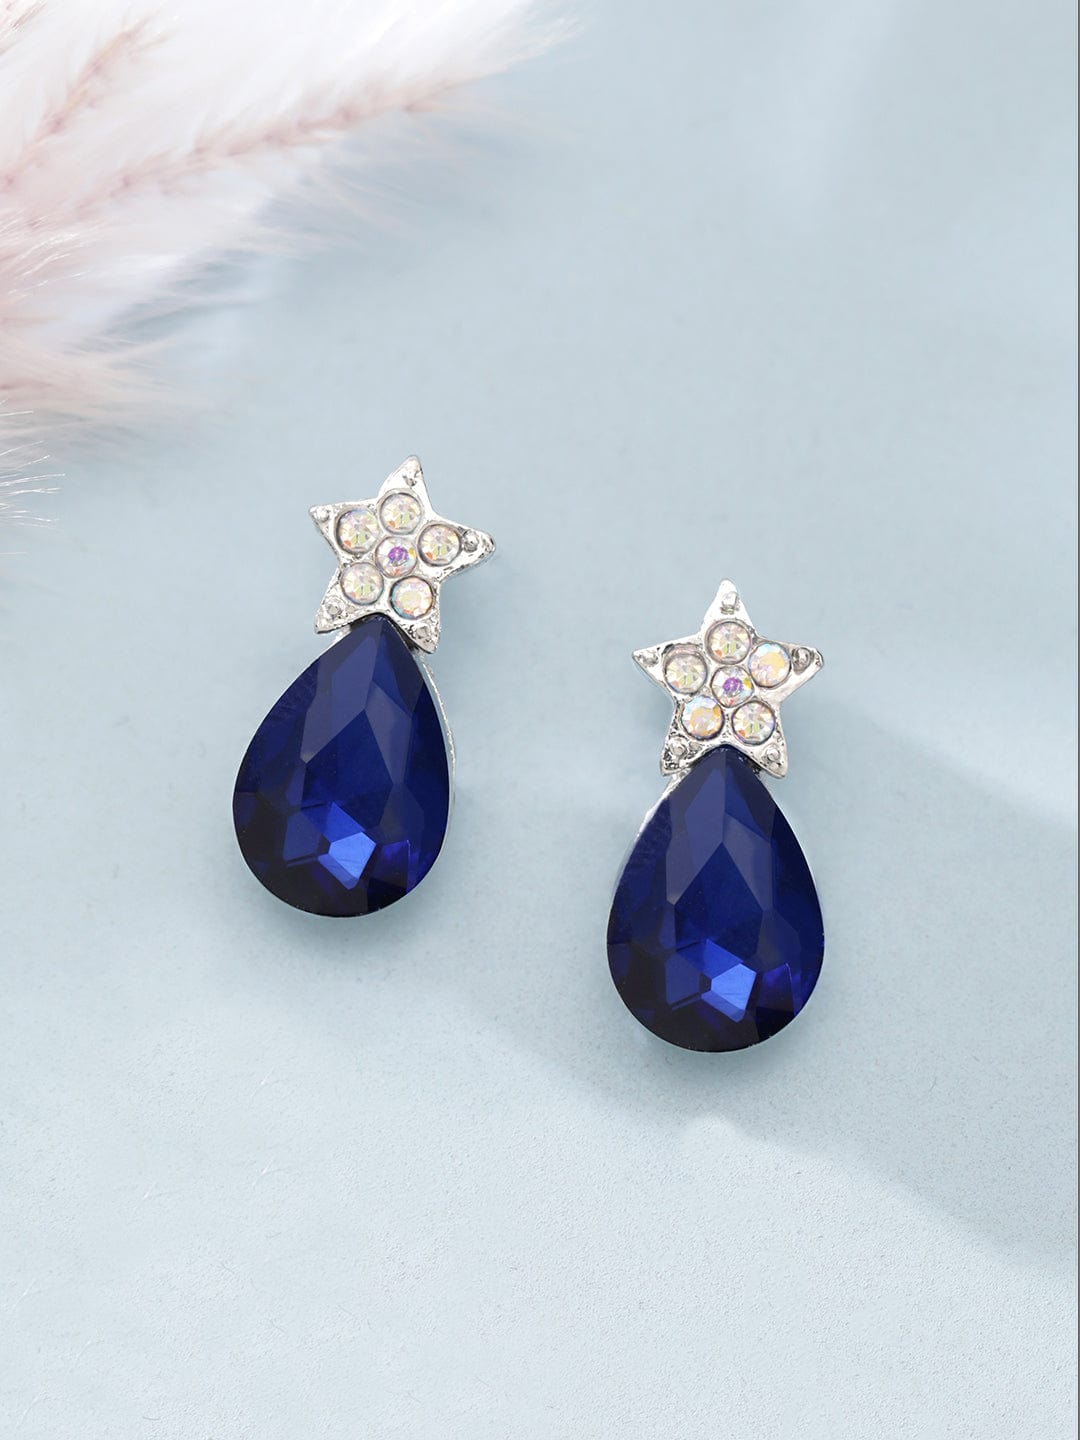 Jeena Silver Tone Earrings with Blue stones and Pearls Dangles : Divas  Dazzle